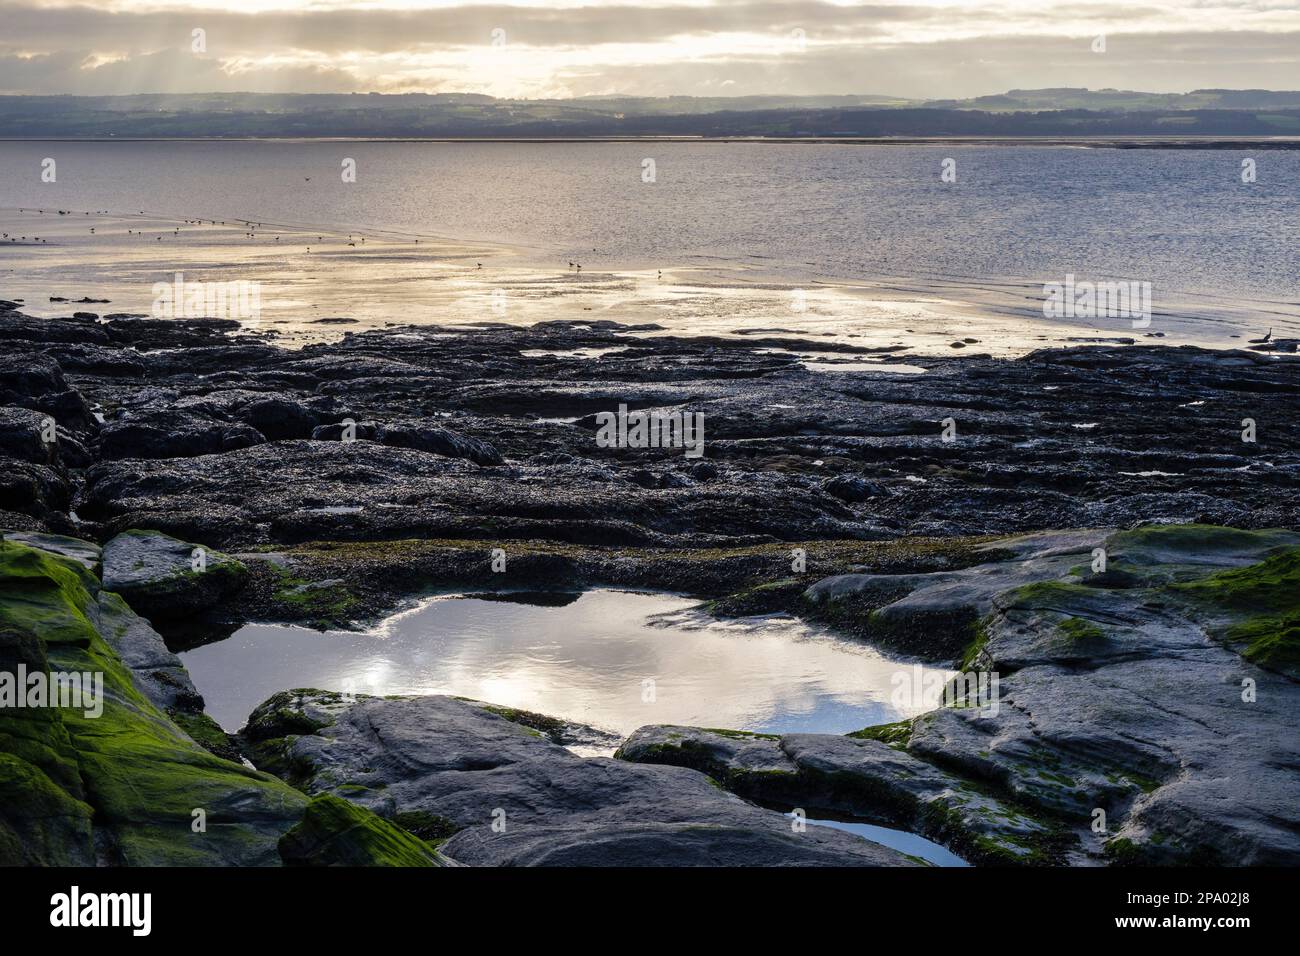 View to Flintshire in Wales from Hilbre island's rocky west coast in Dee Estuary at low tide. West Kirby, Wirral Peninsula, Merseyside, England, UK Stock Photo